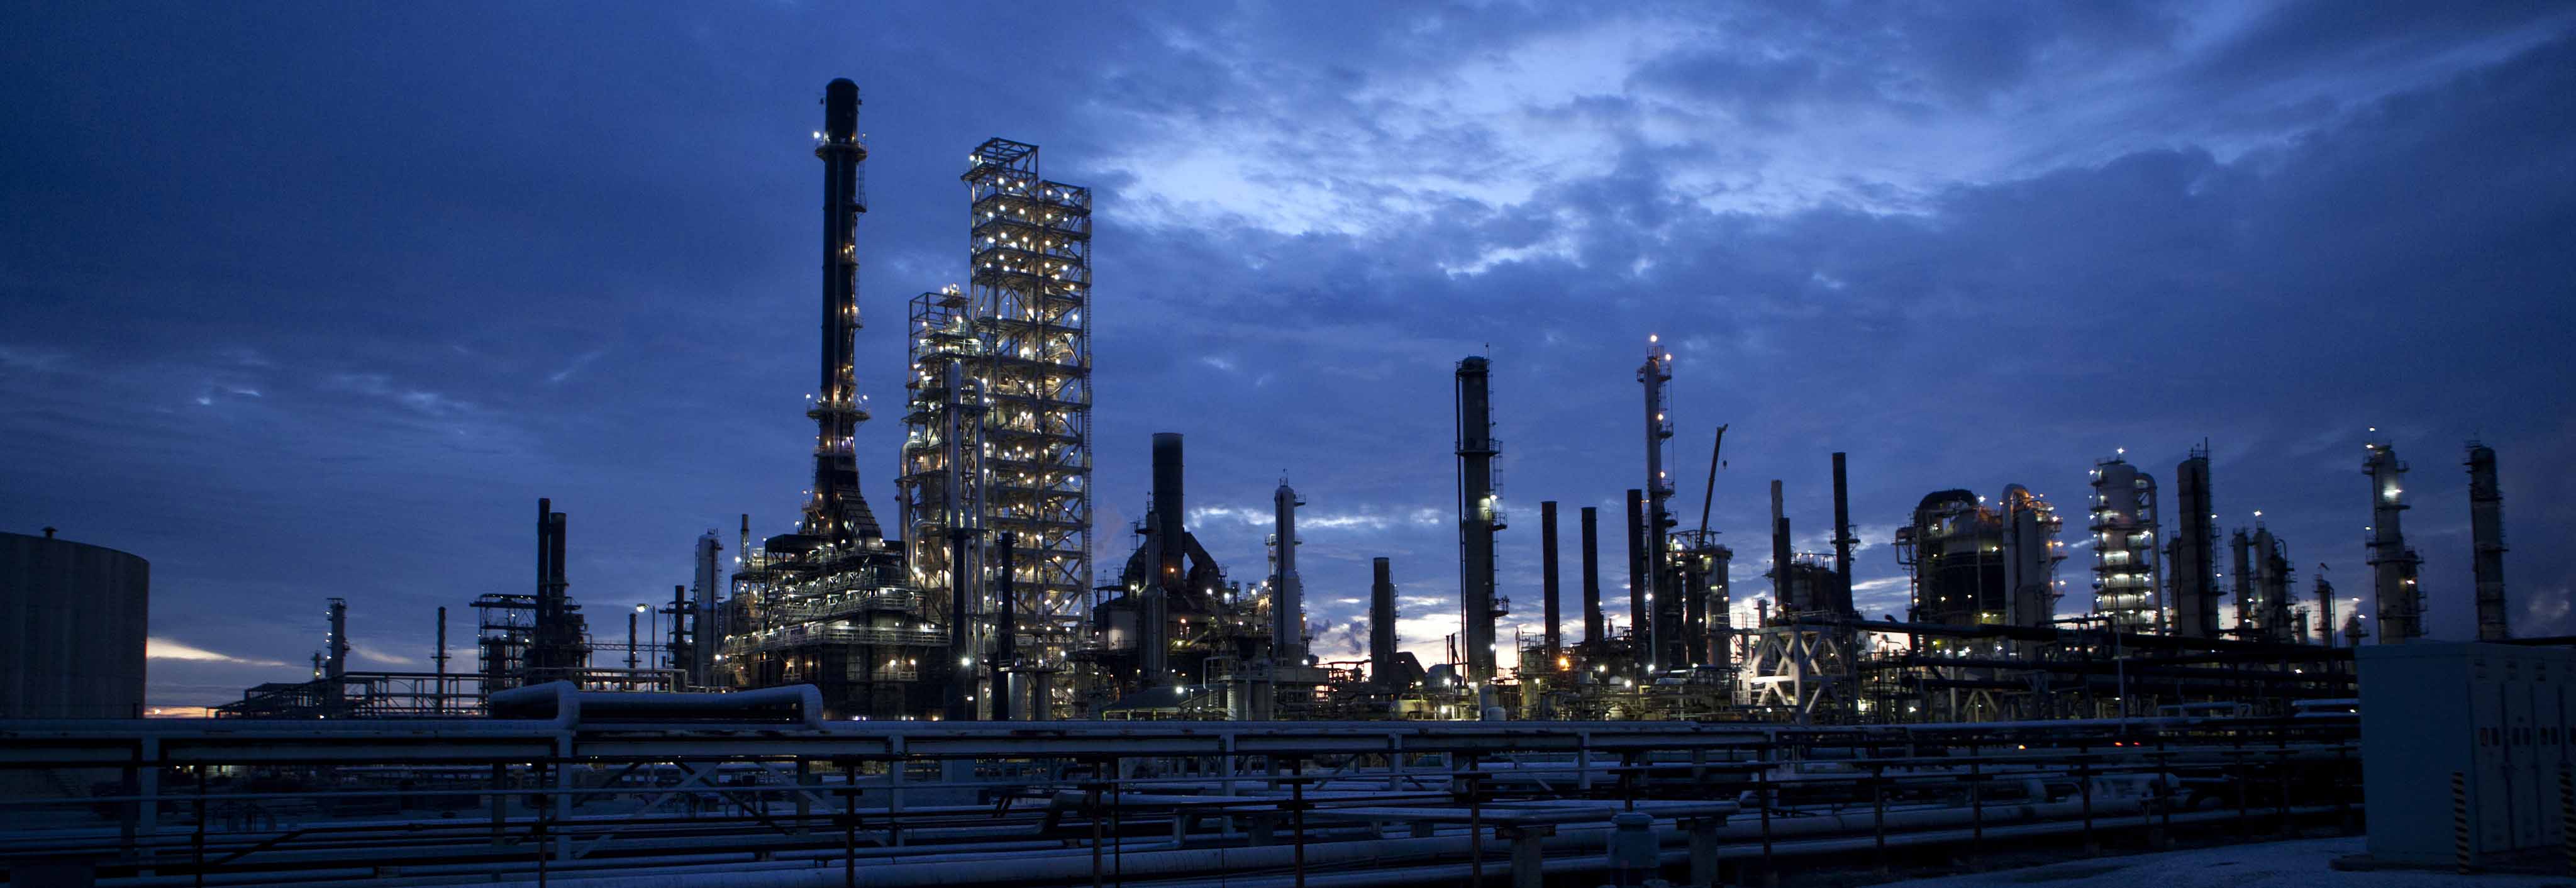 a scenic view of the Pascagoula Refinery at sunrise